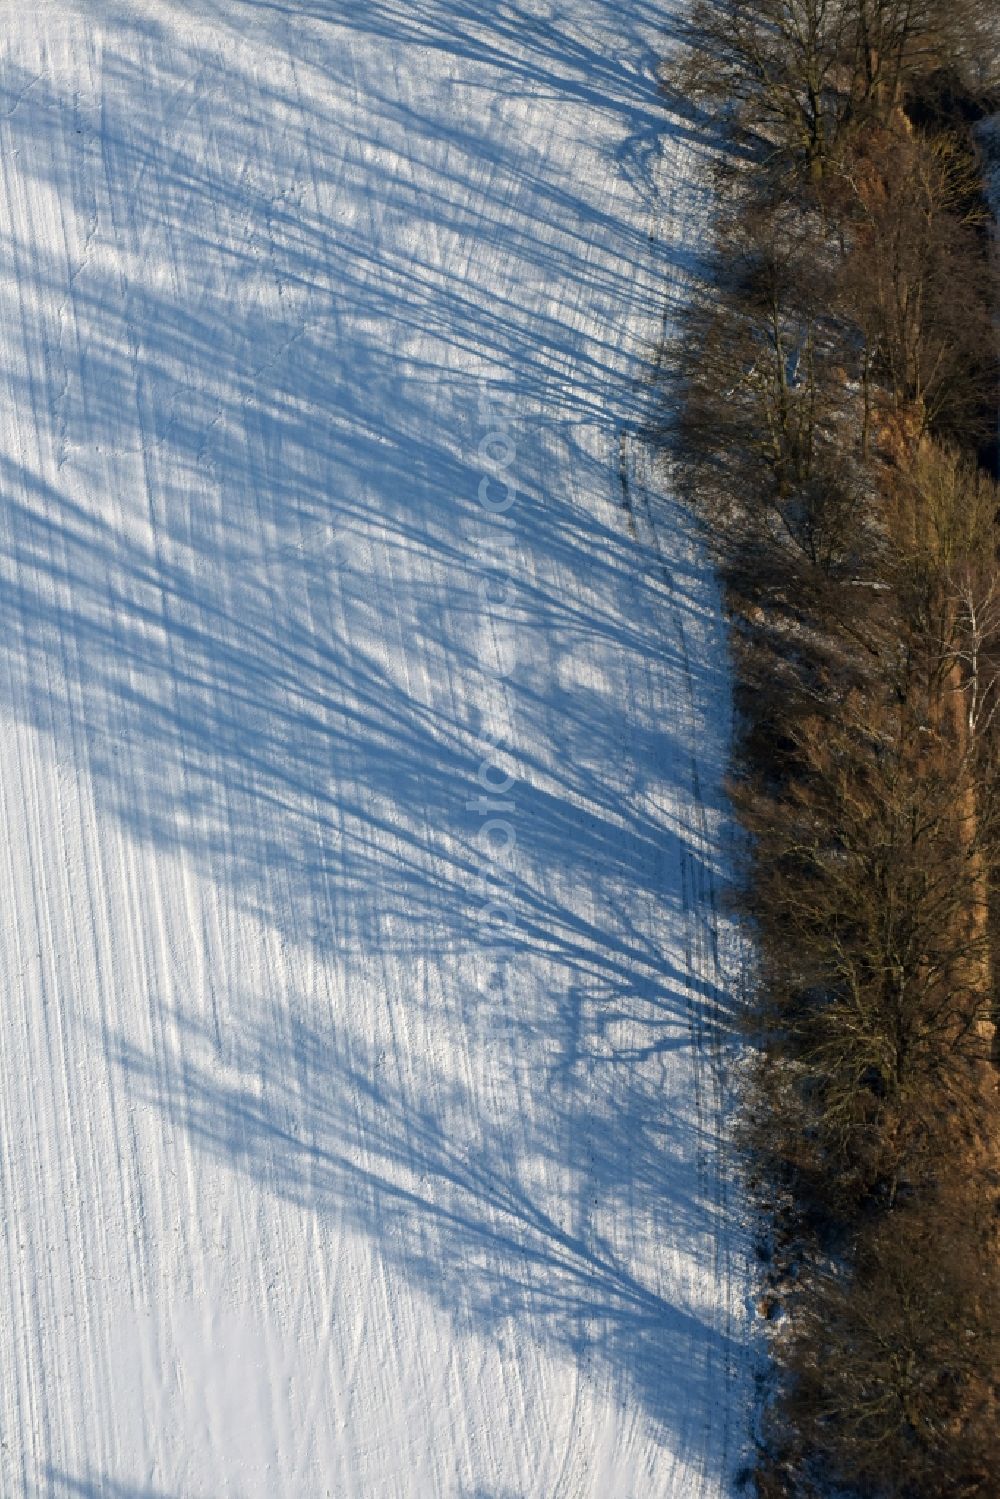 Aerial image Roskow - Winterly snowy rows with asparagus growing on field surfaces with irrigation ditch and line of trees casting long shadows in Roskow in the state Brandenburg